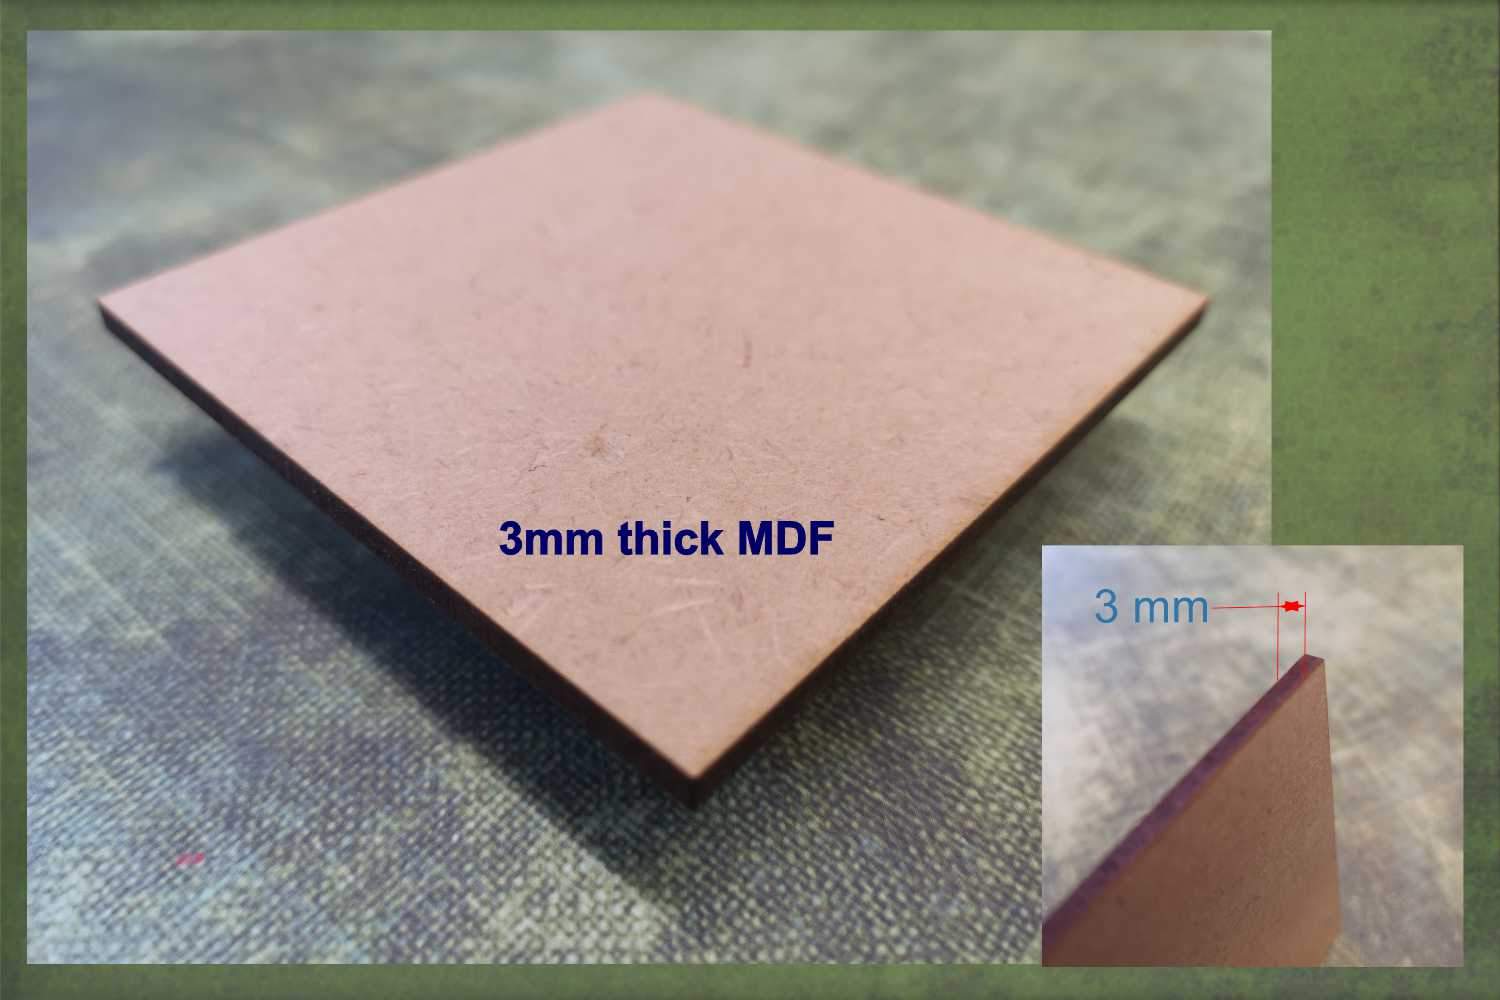 3mm thick MDF used to make the Shopping bag cut-outs ready for crafting